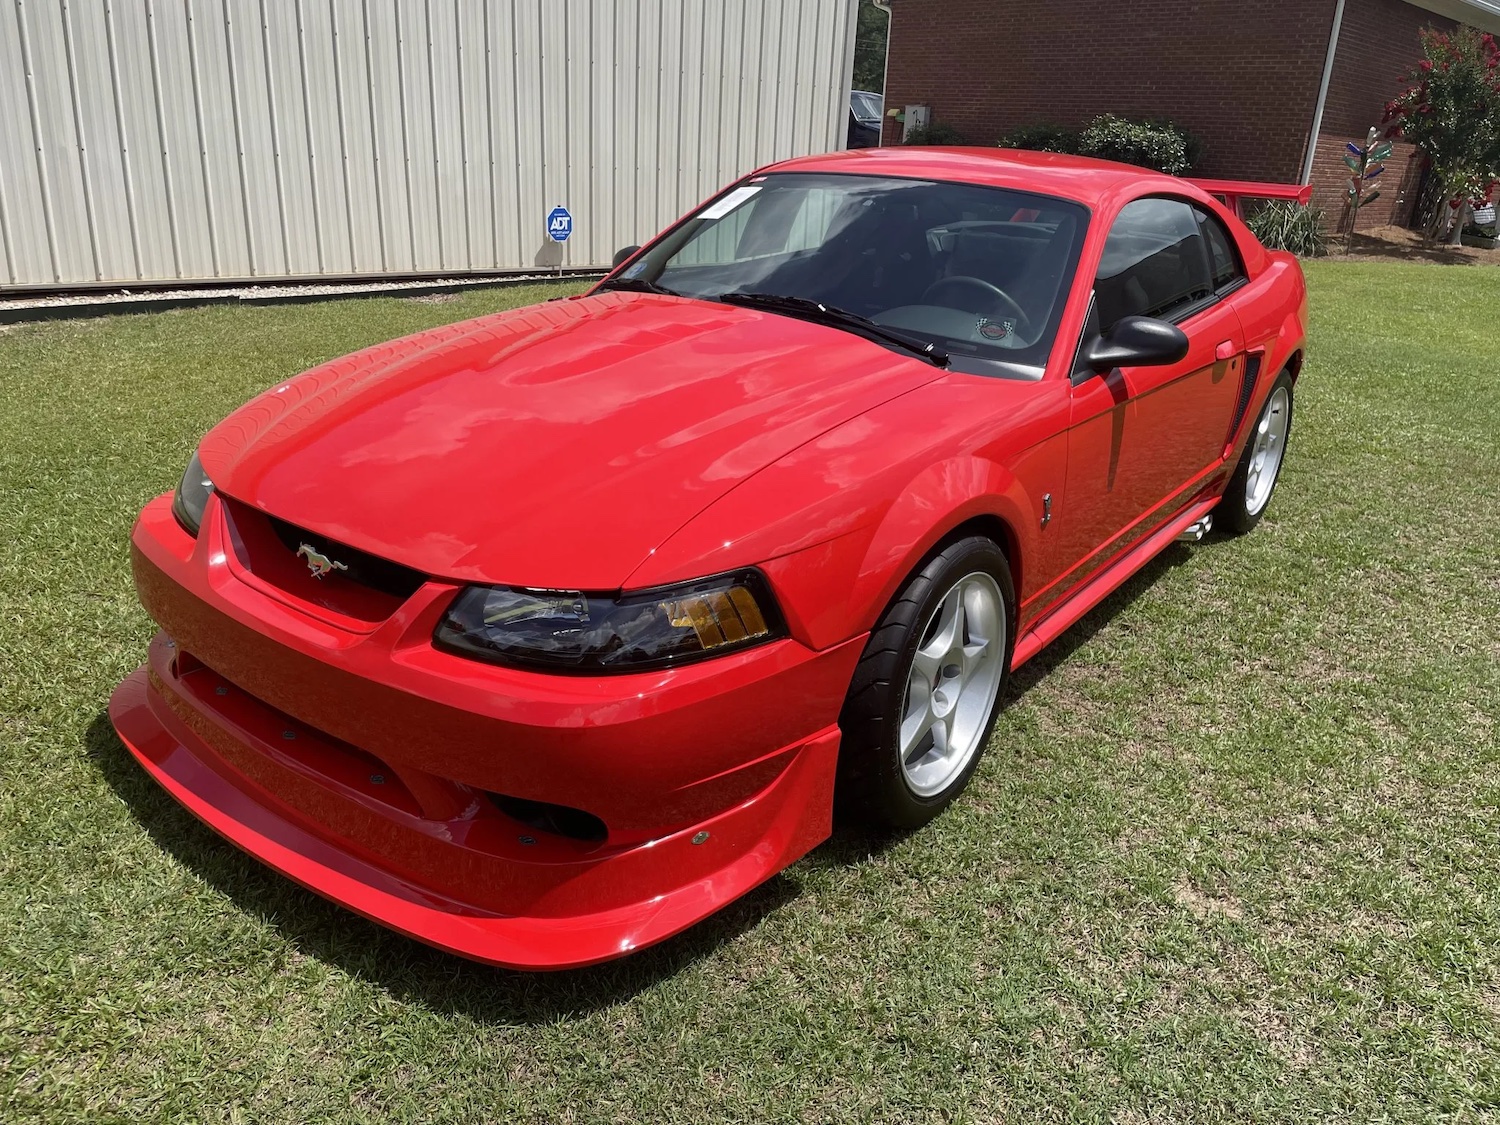 500-Mile 2000 Ford Mustang Cobra R Up For Auction